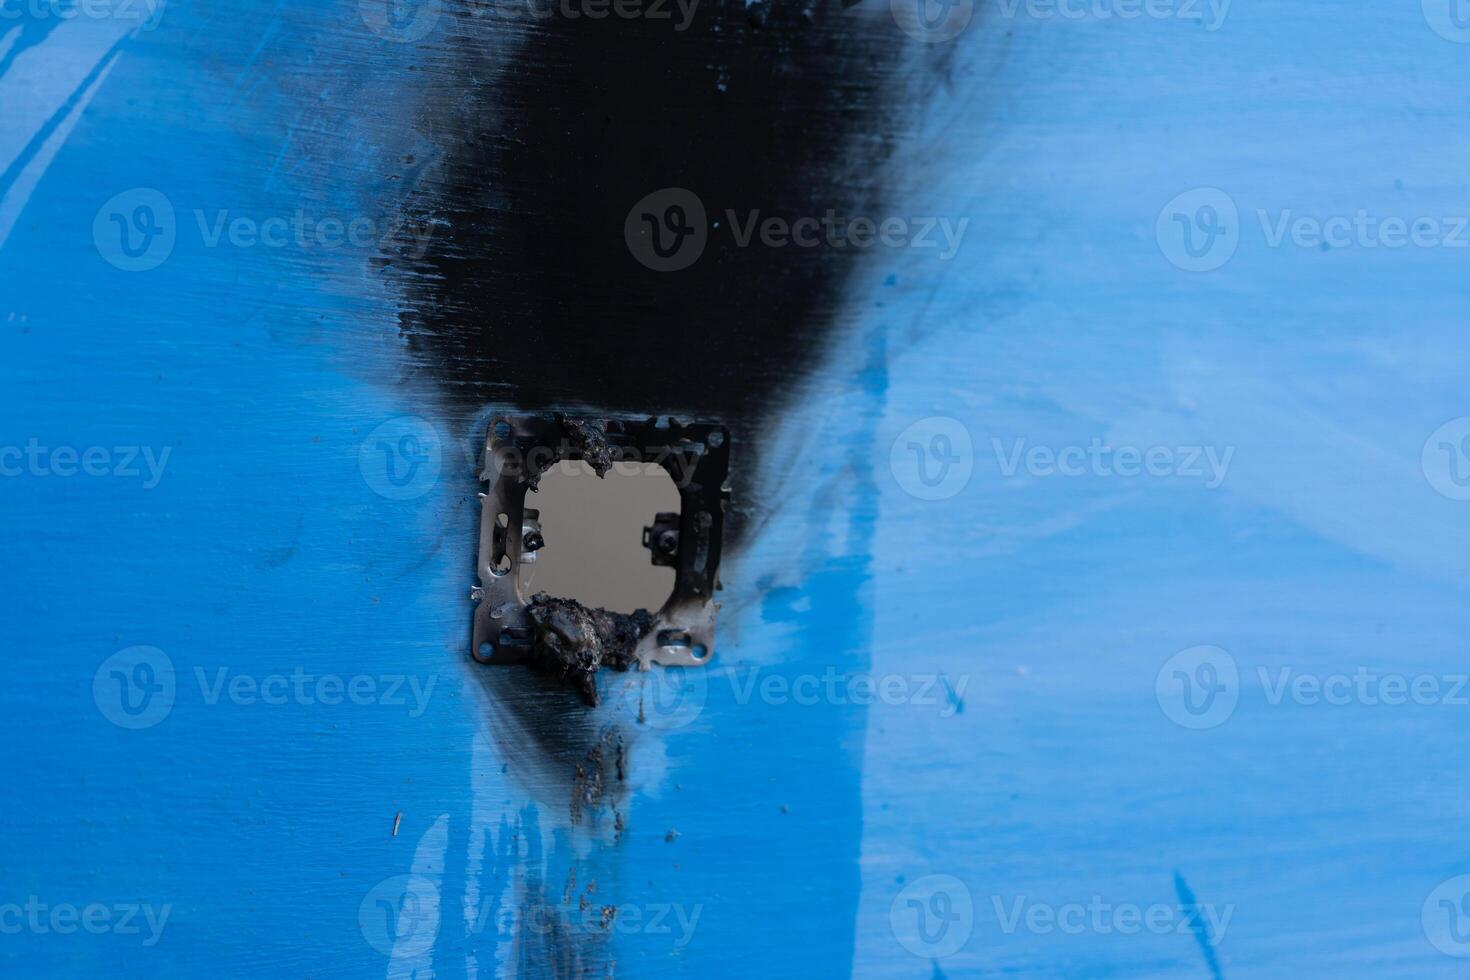 Electricity short circuit Electrical failure resulting in electricity wire burnt photo